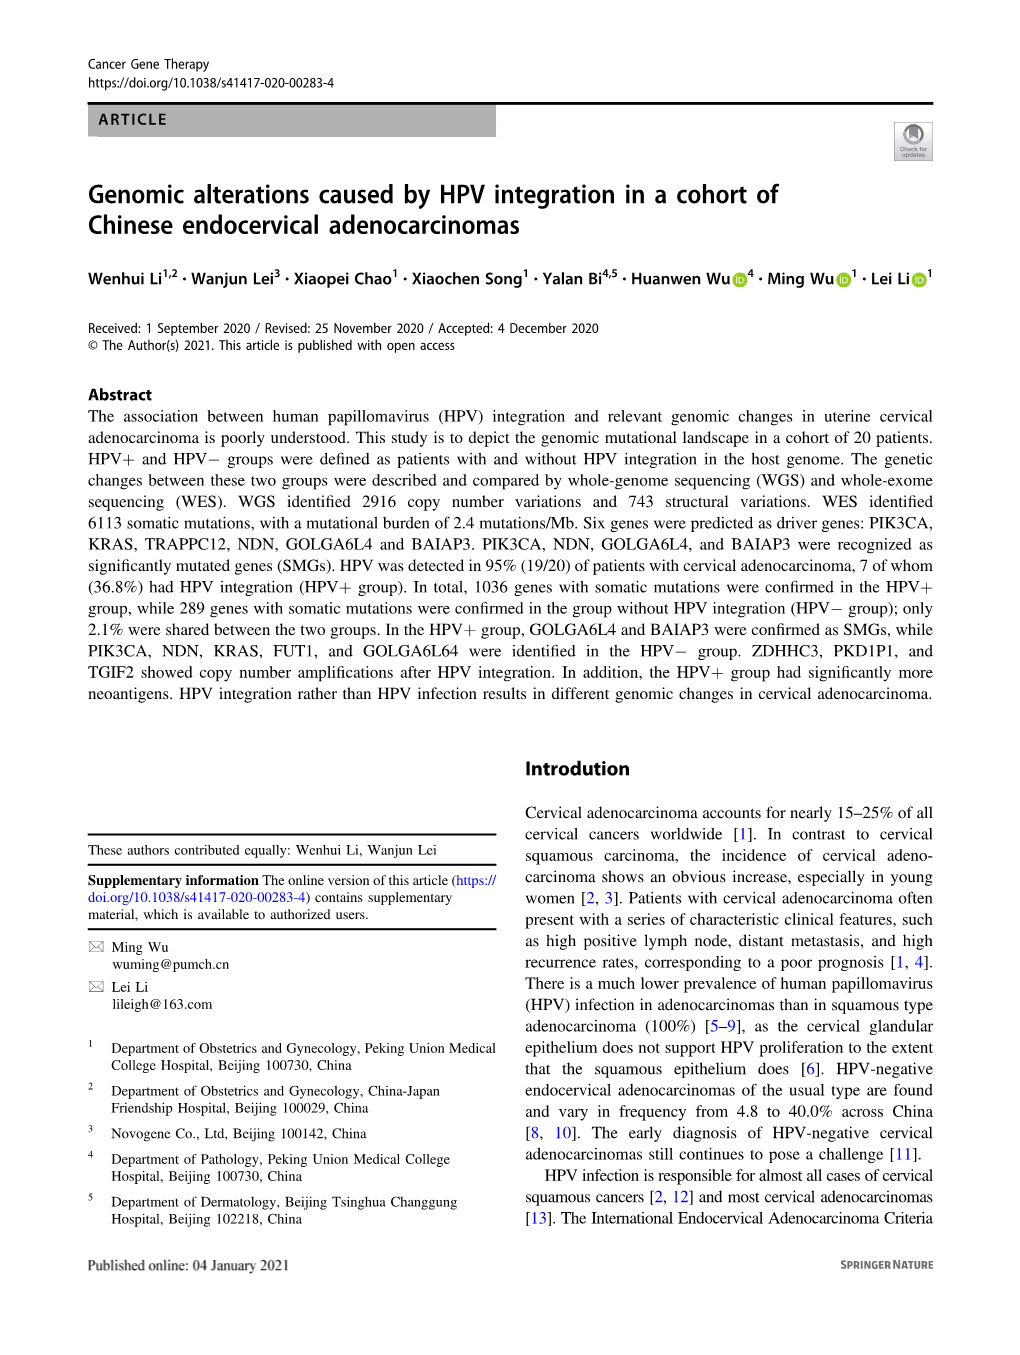 Genomic Alterations Caused by HPV Integration in a Cohort of Chinese Endocervical Adenocarcinomas